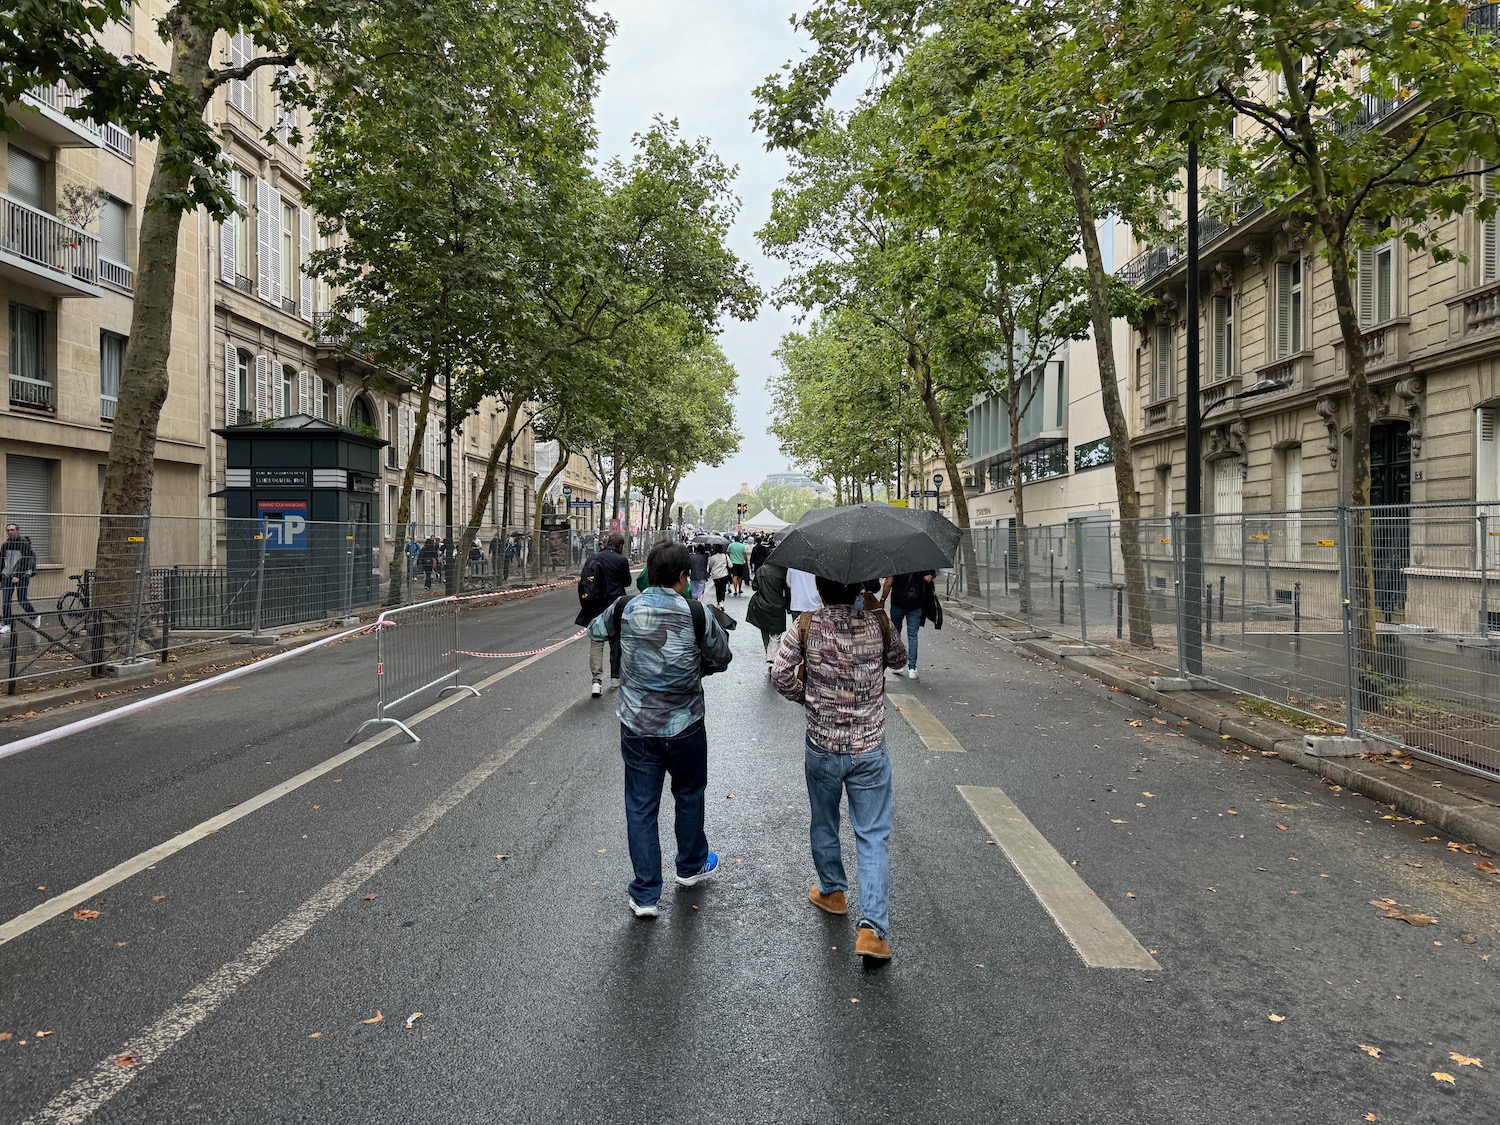 people walking down a street with people holding umbrellas